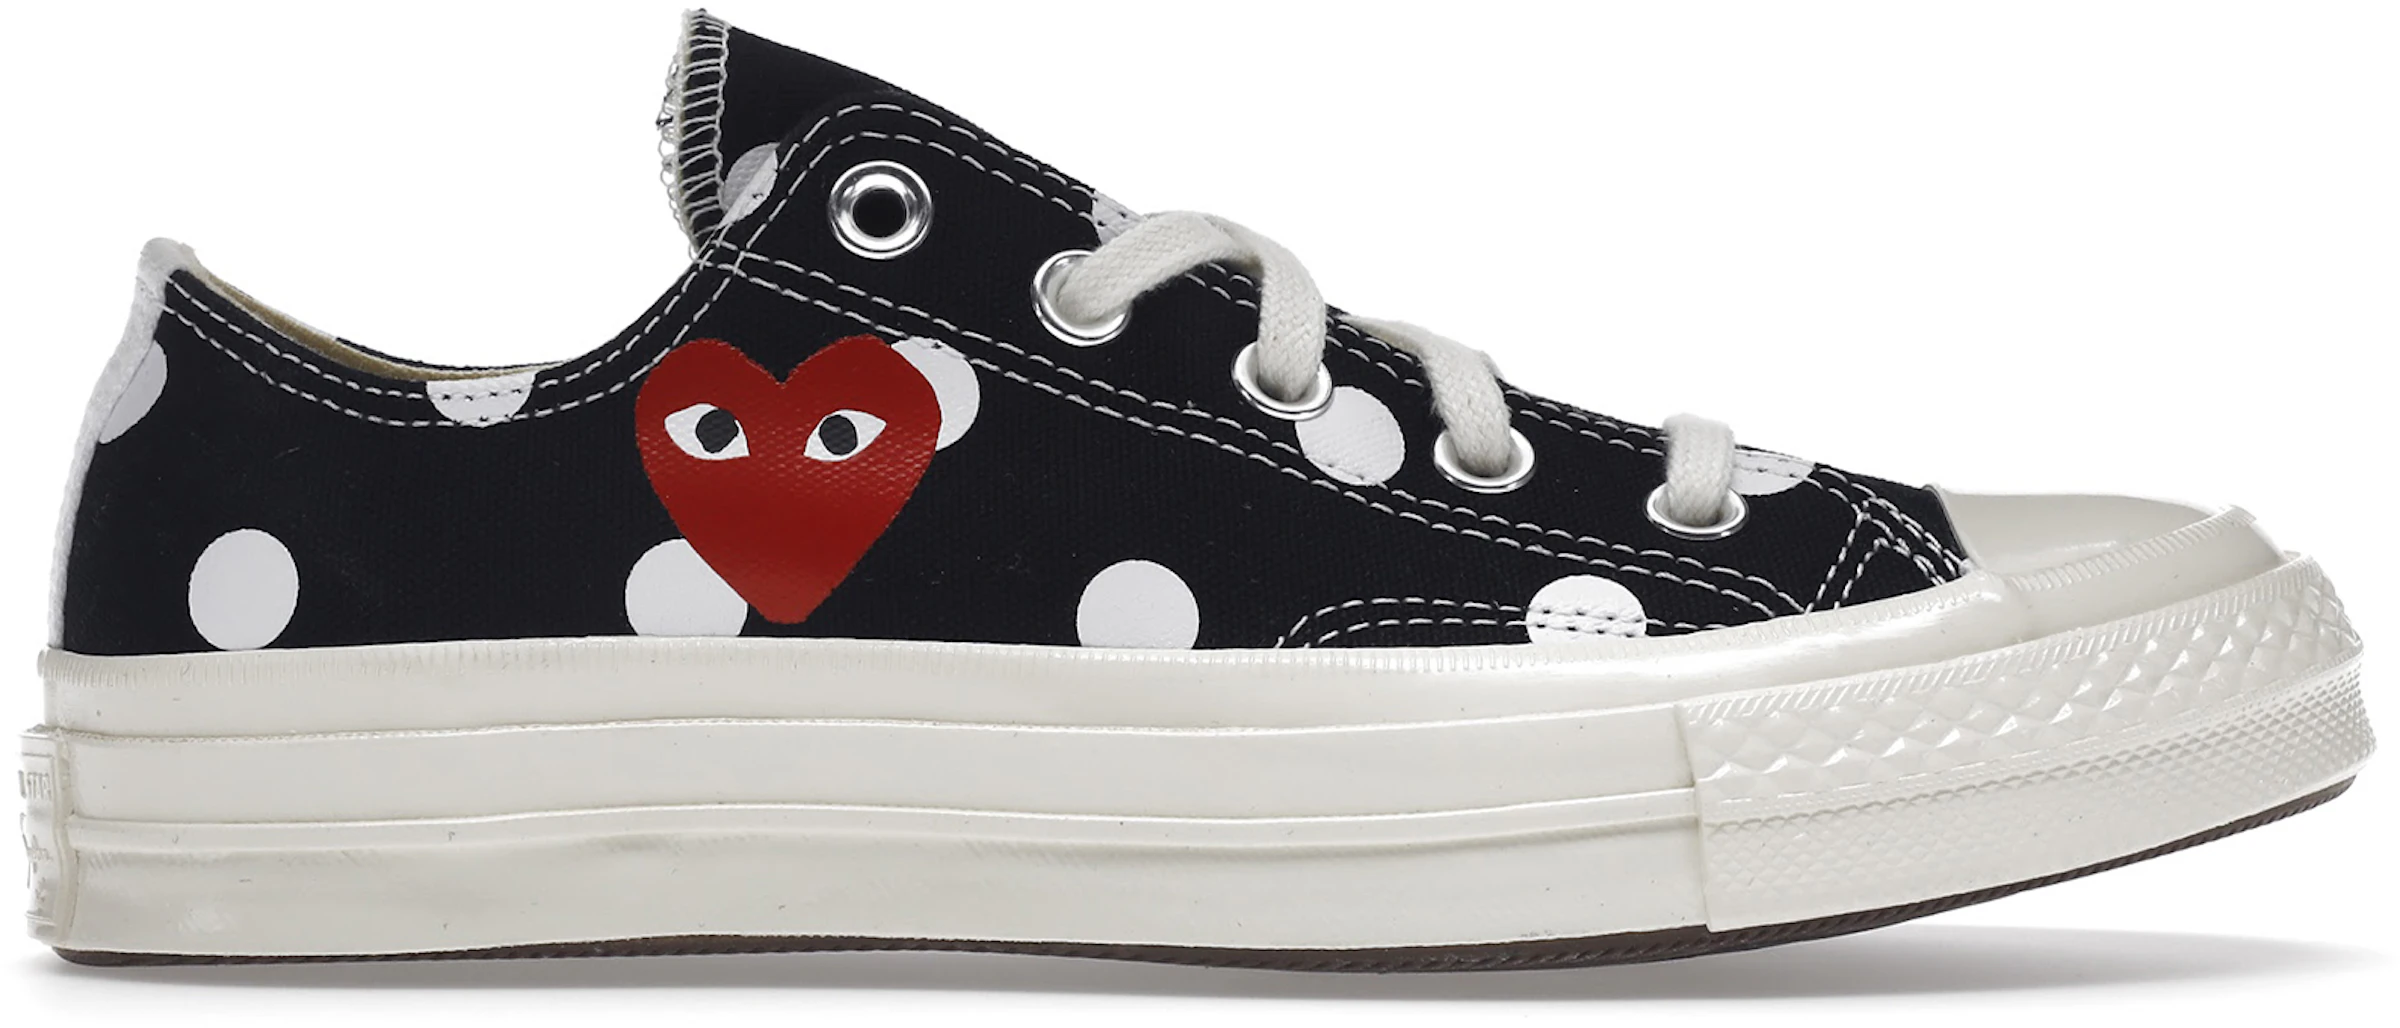 Zielig tuin Woning Converse Chuck Taylor All-Star 70 Ox Comme des Garcons PLAY Polka Dot Black  - 157248C - US